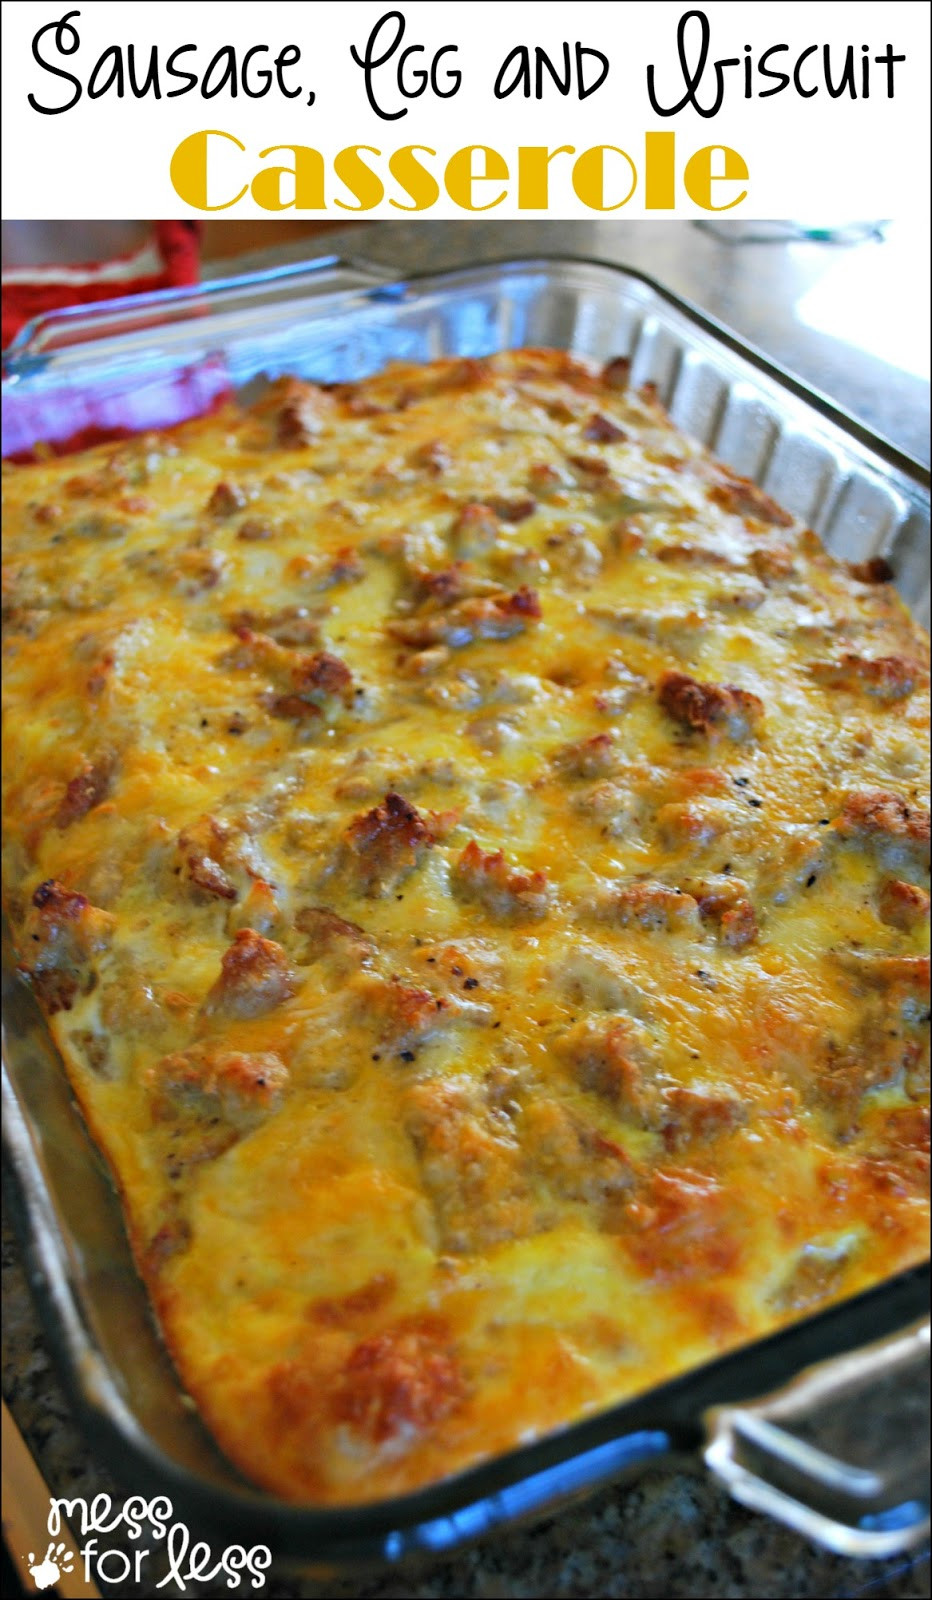 Biscuit Casserole Recipes
 The BEST Sausage Egg and Biscuit Breakfast Casserole